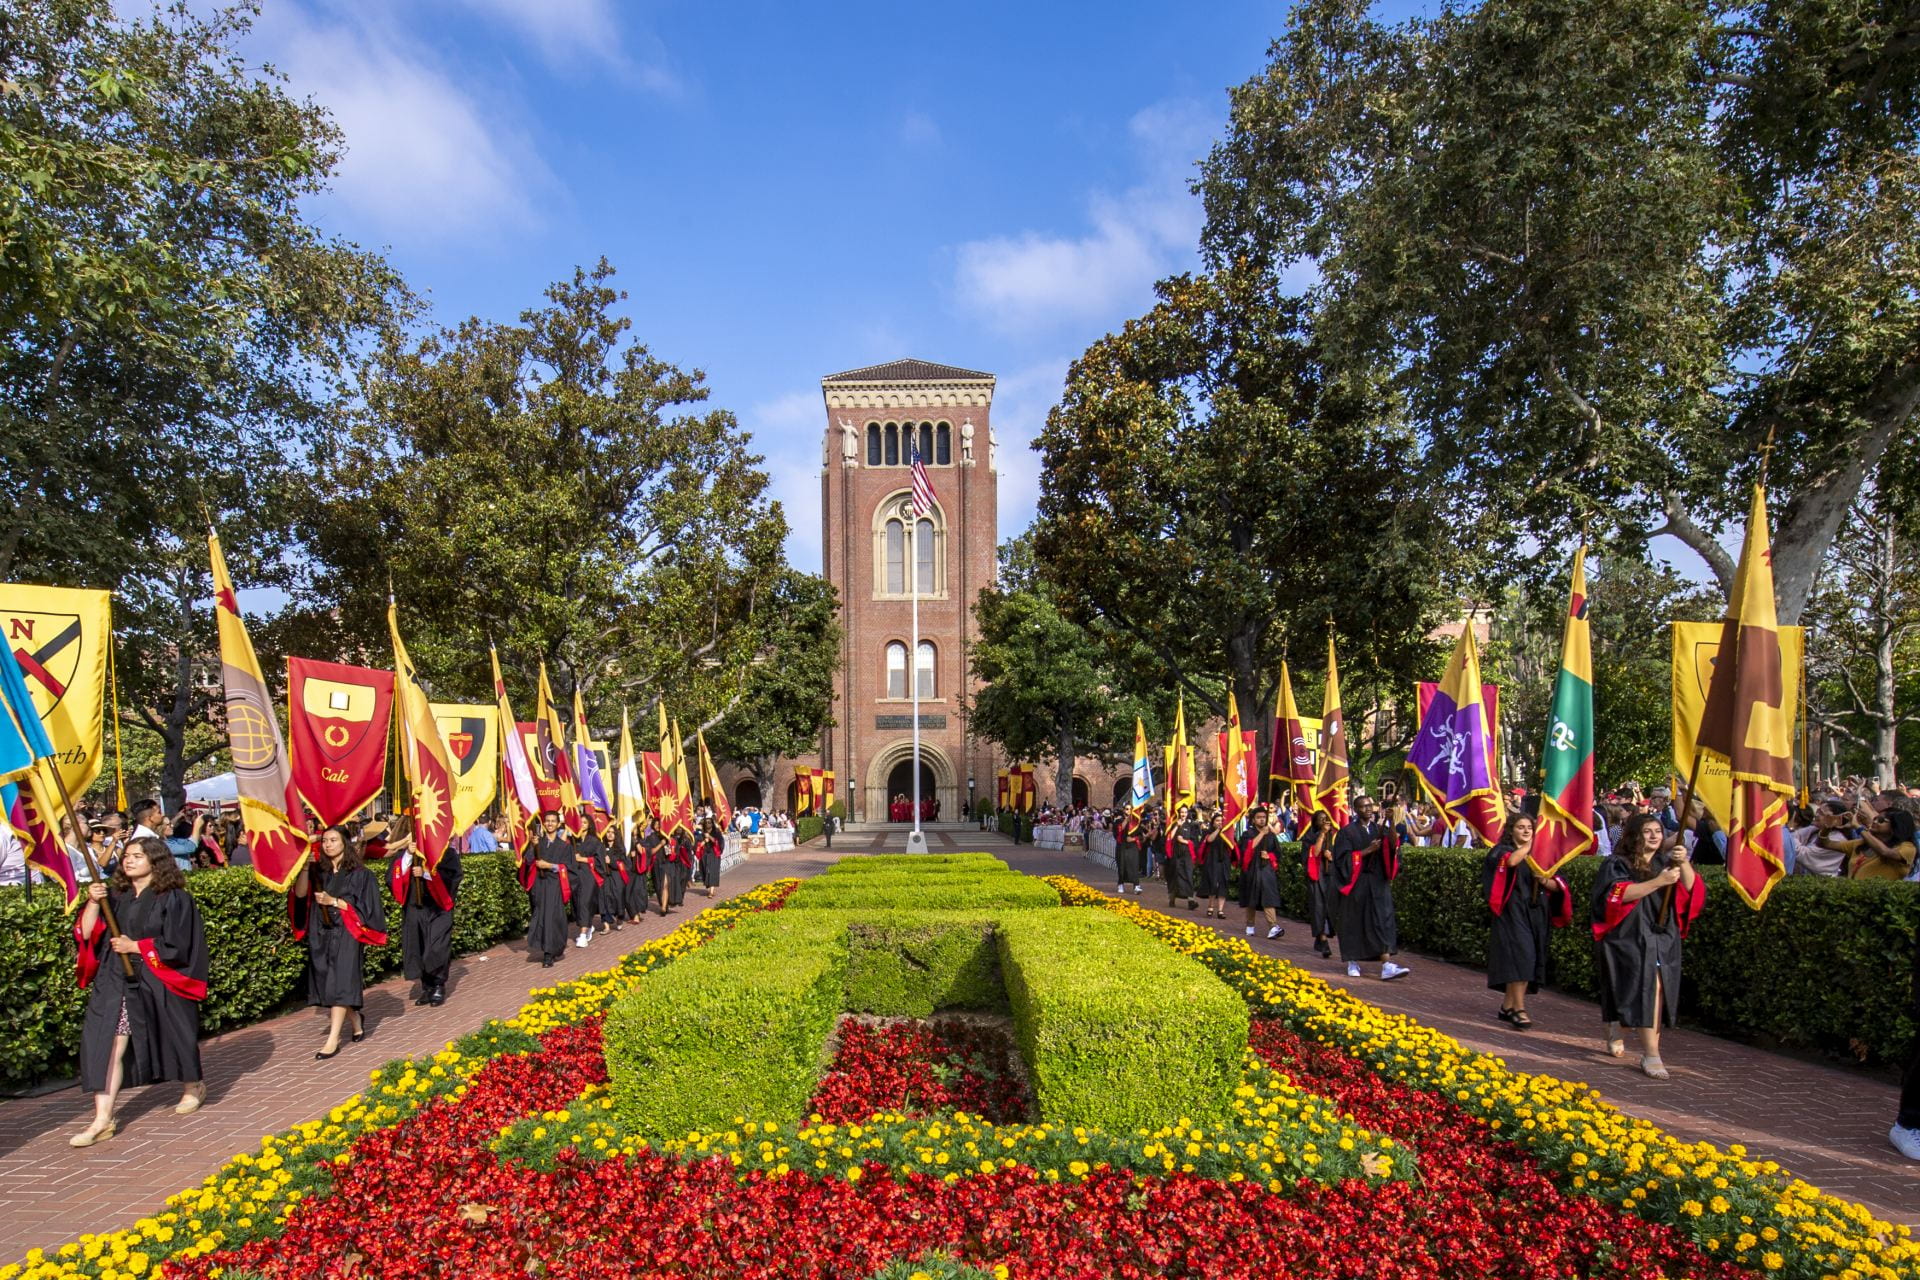 Flag bearers march into Alumni Park during new student Convocation, August 22, 2019. (Photo/Gus Ruelas)